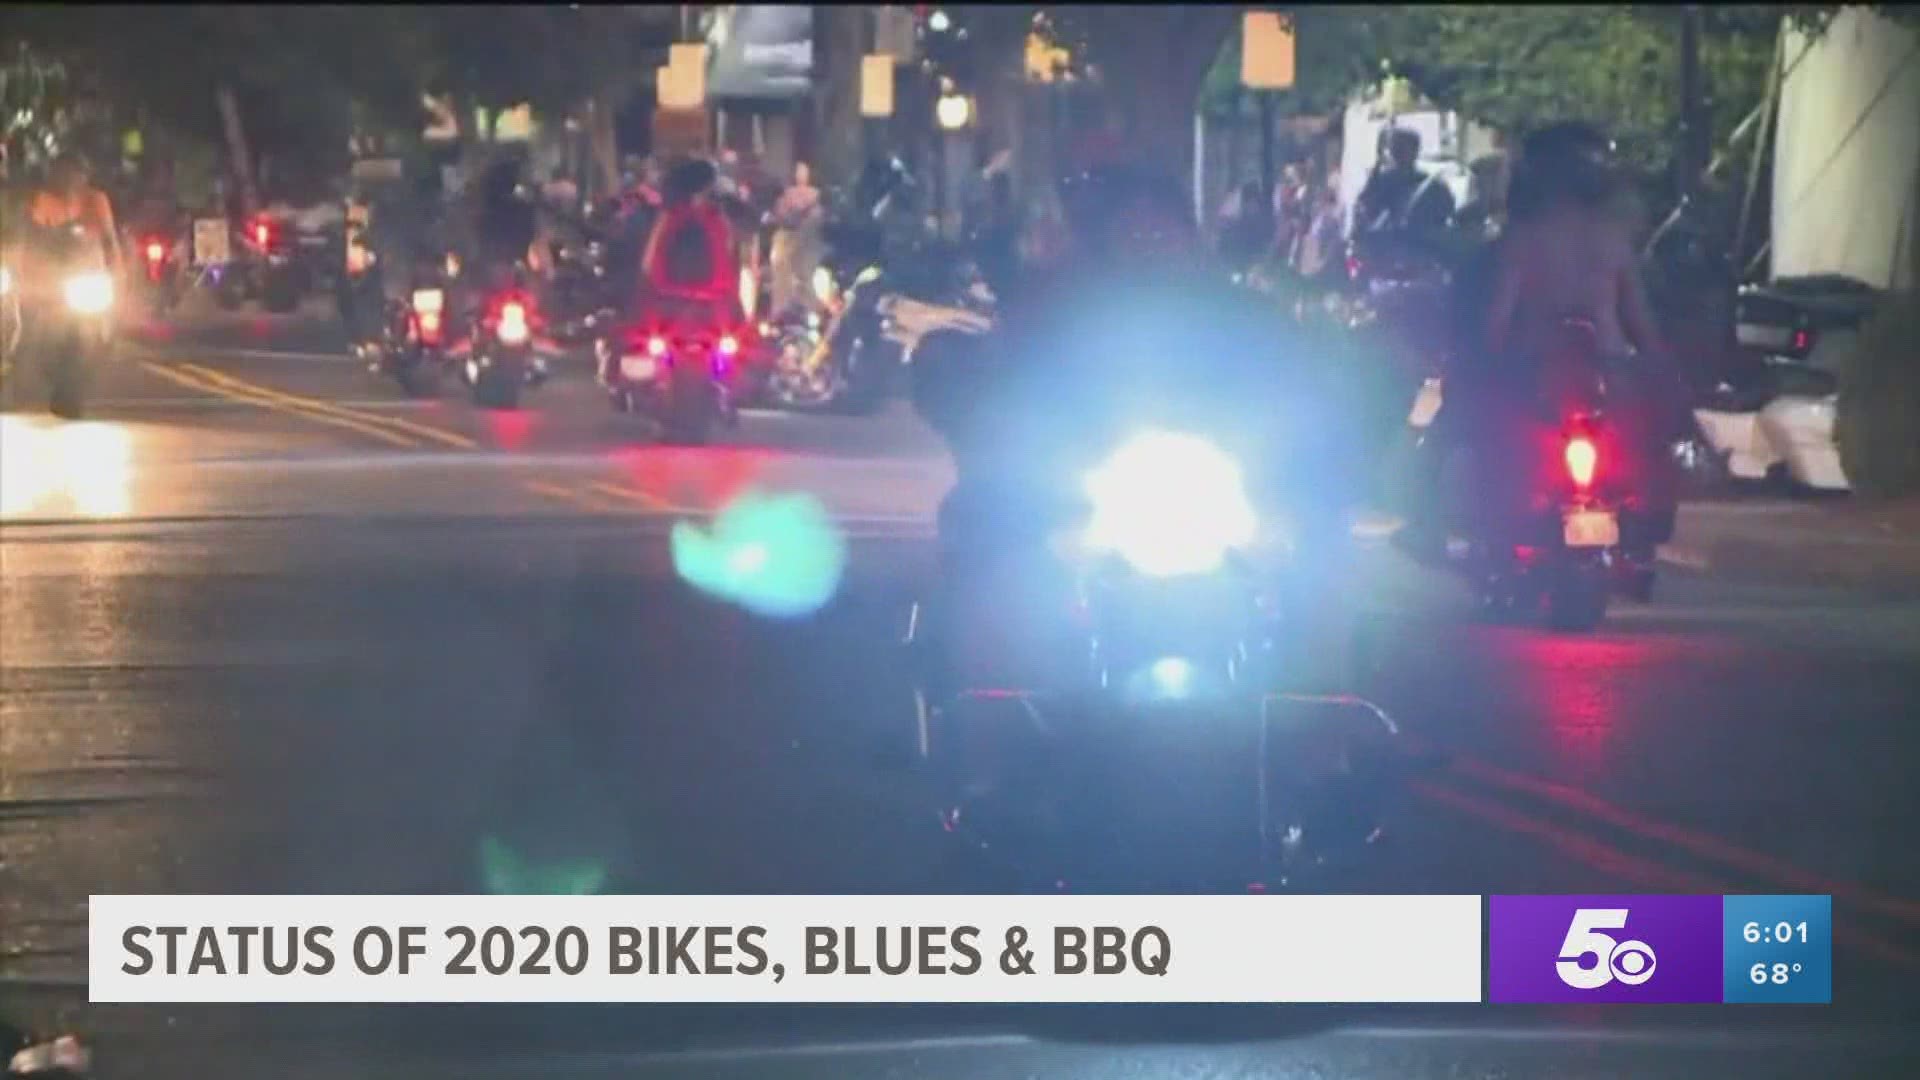 Will Bikes, Blues & BBQ take place in 2020?